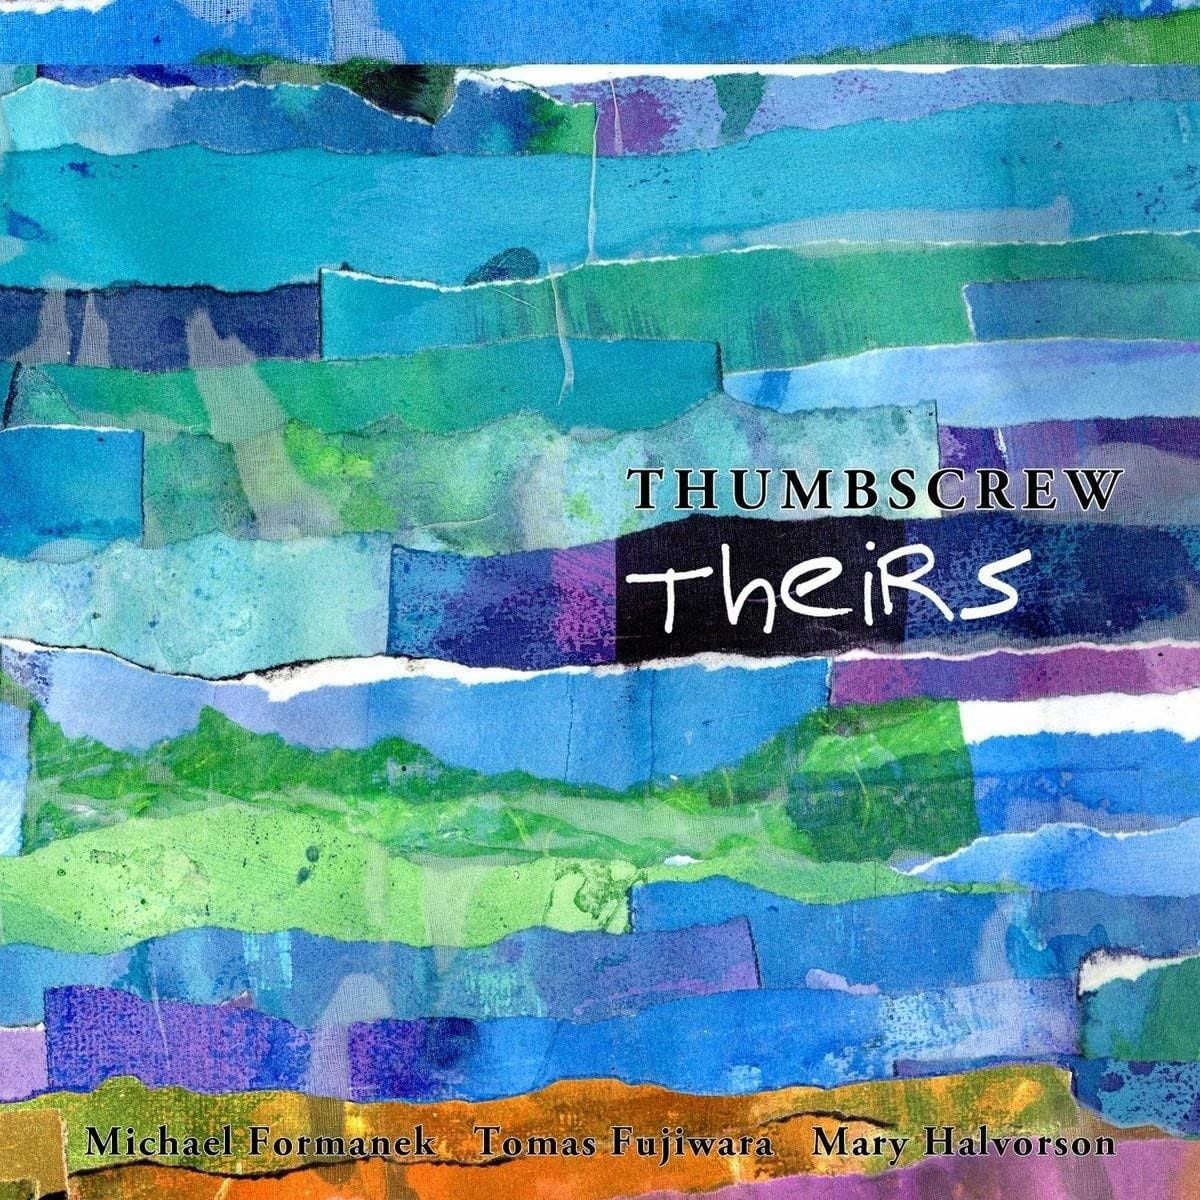 thumbscrew-ours-theirs-review